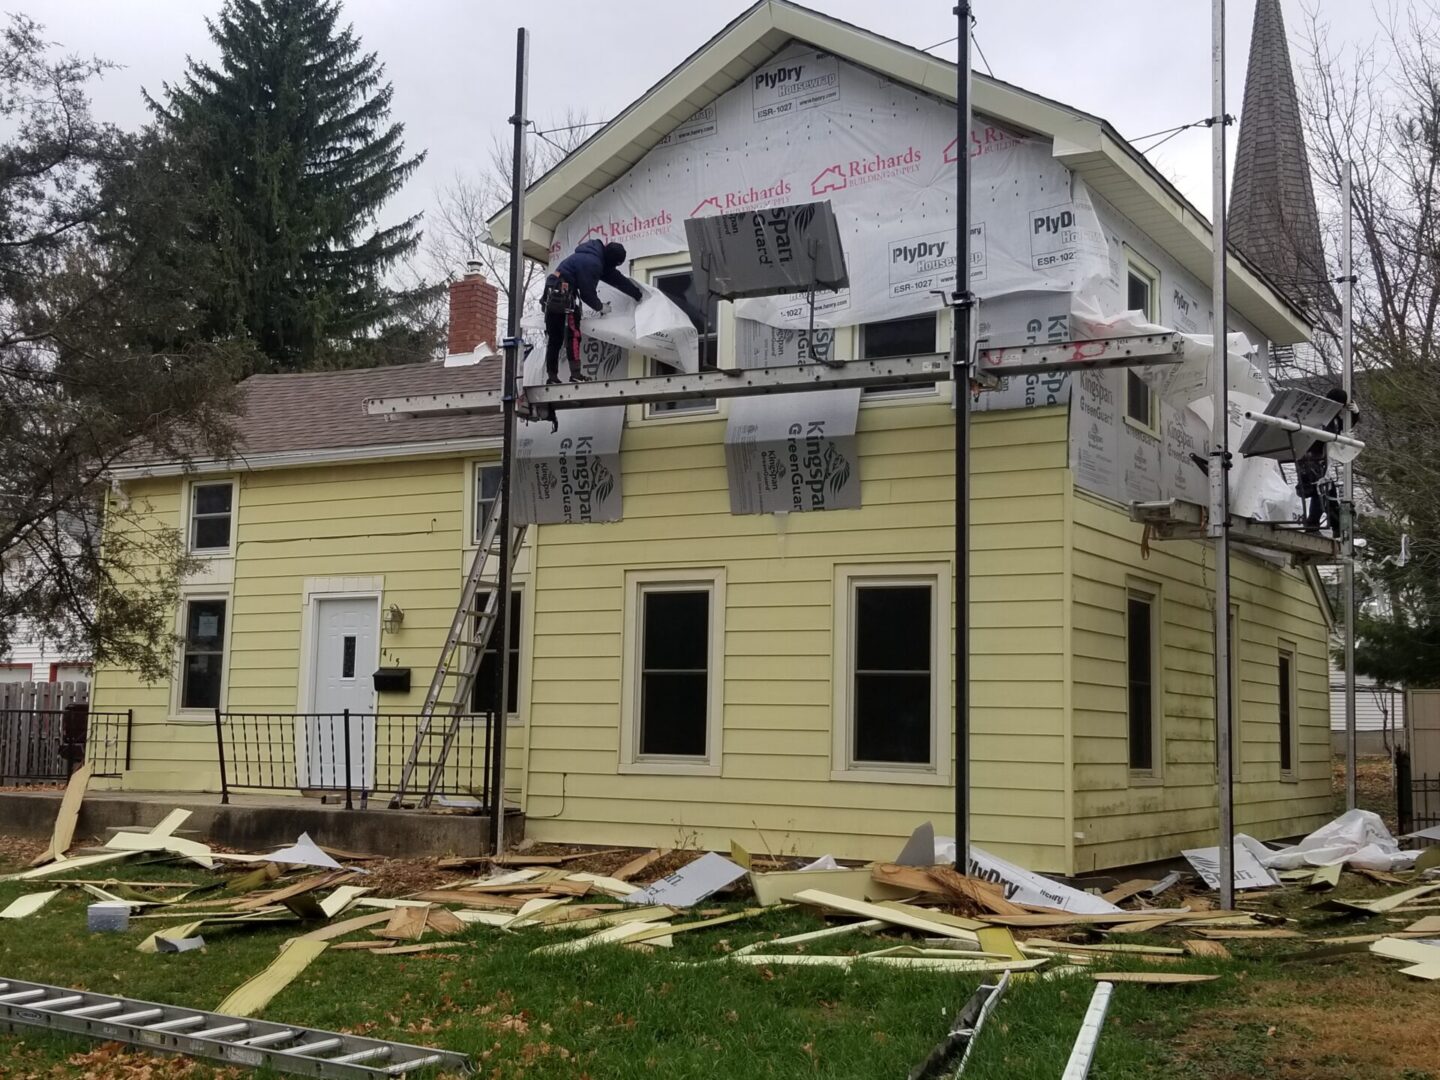 A man on a ladder working on the roof of a house.